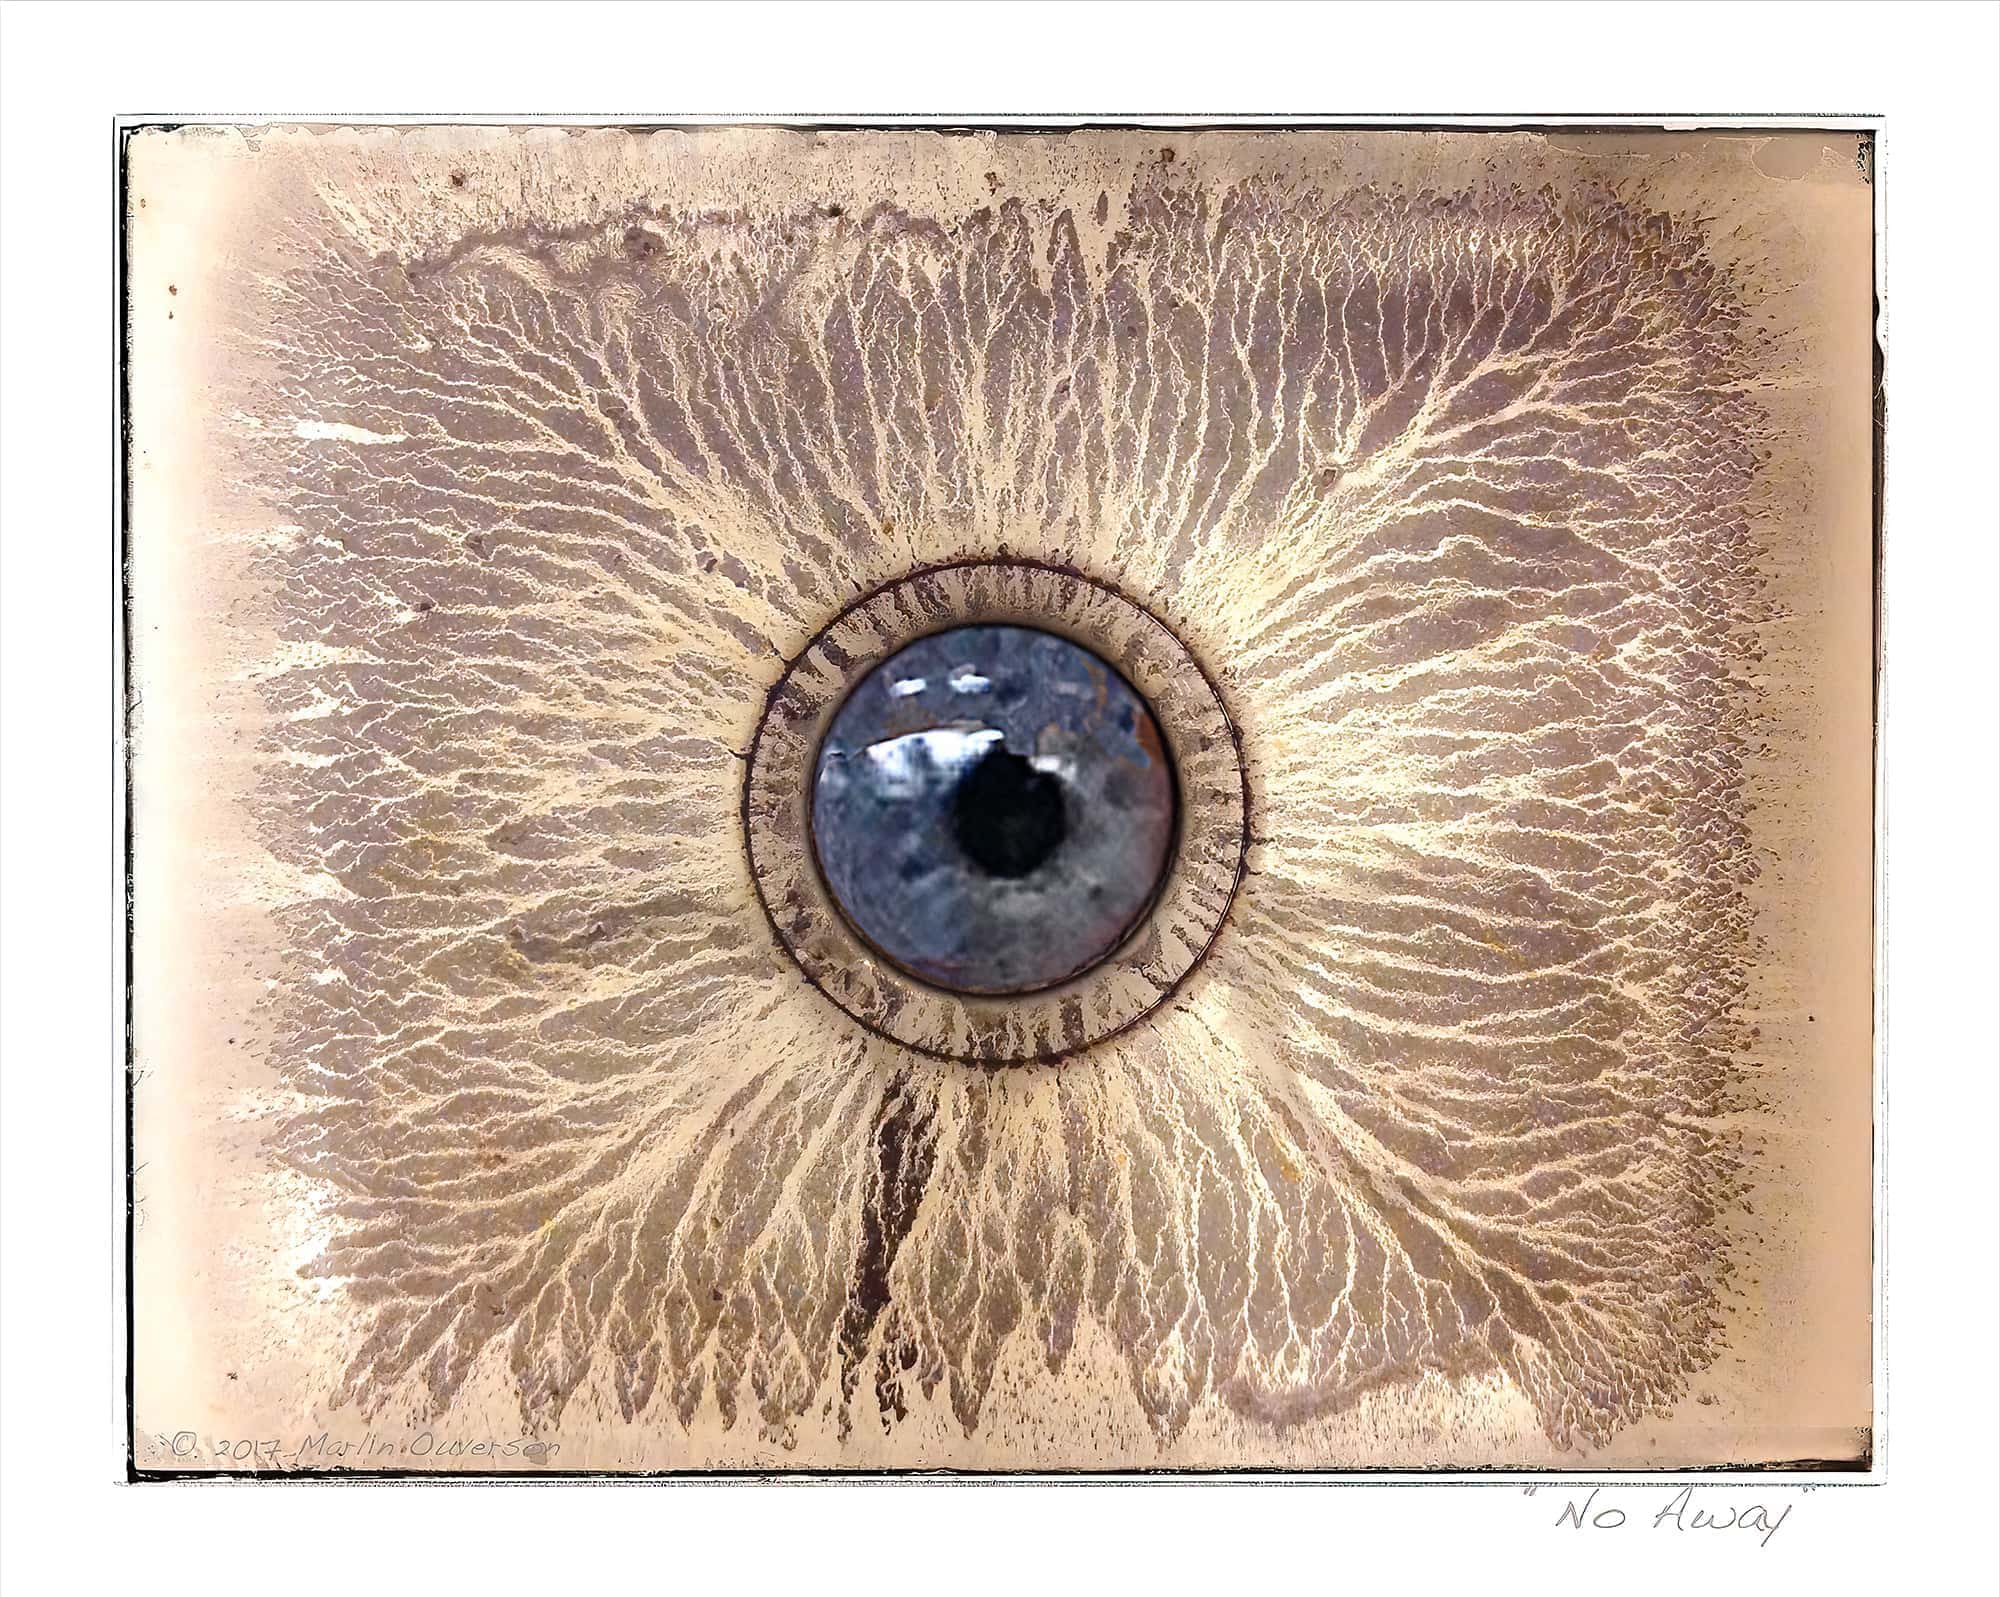 art: large blue eyeball looking out from the center of a dirty, grungy pattern reminiscent of erosion and foul flooding